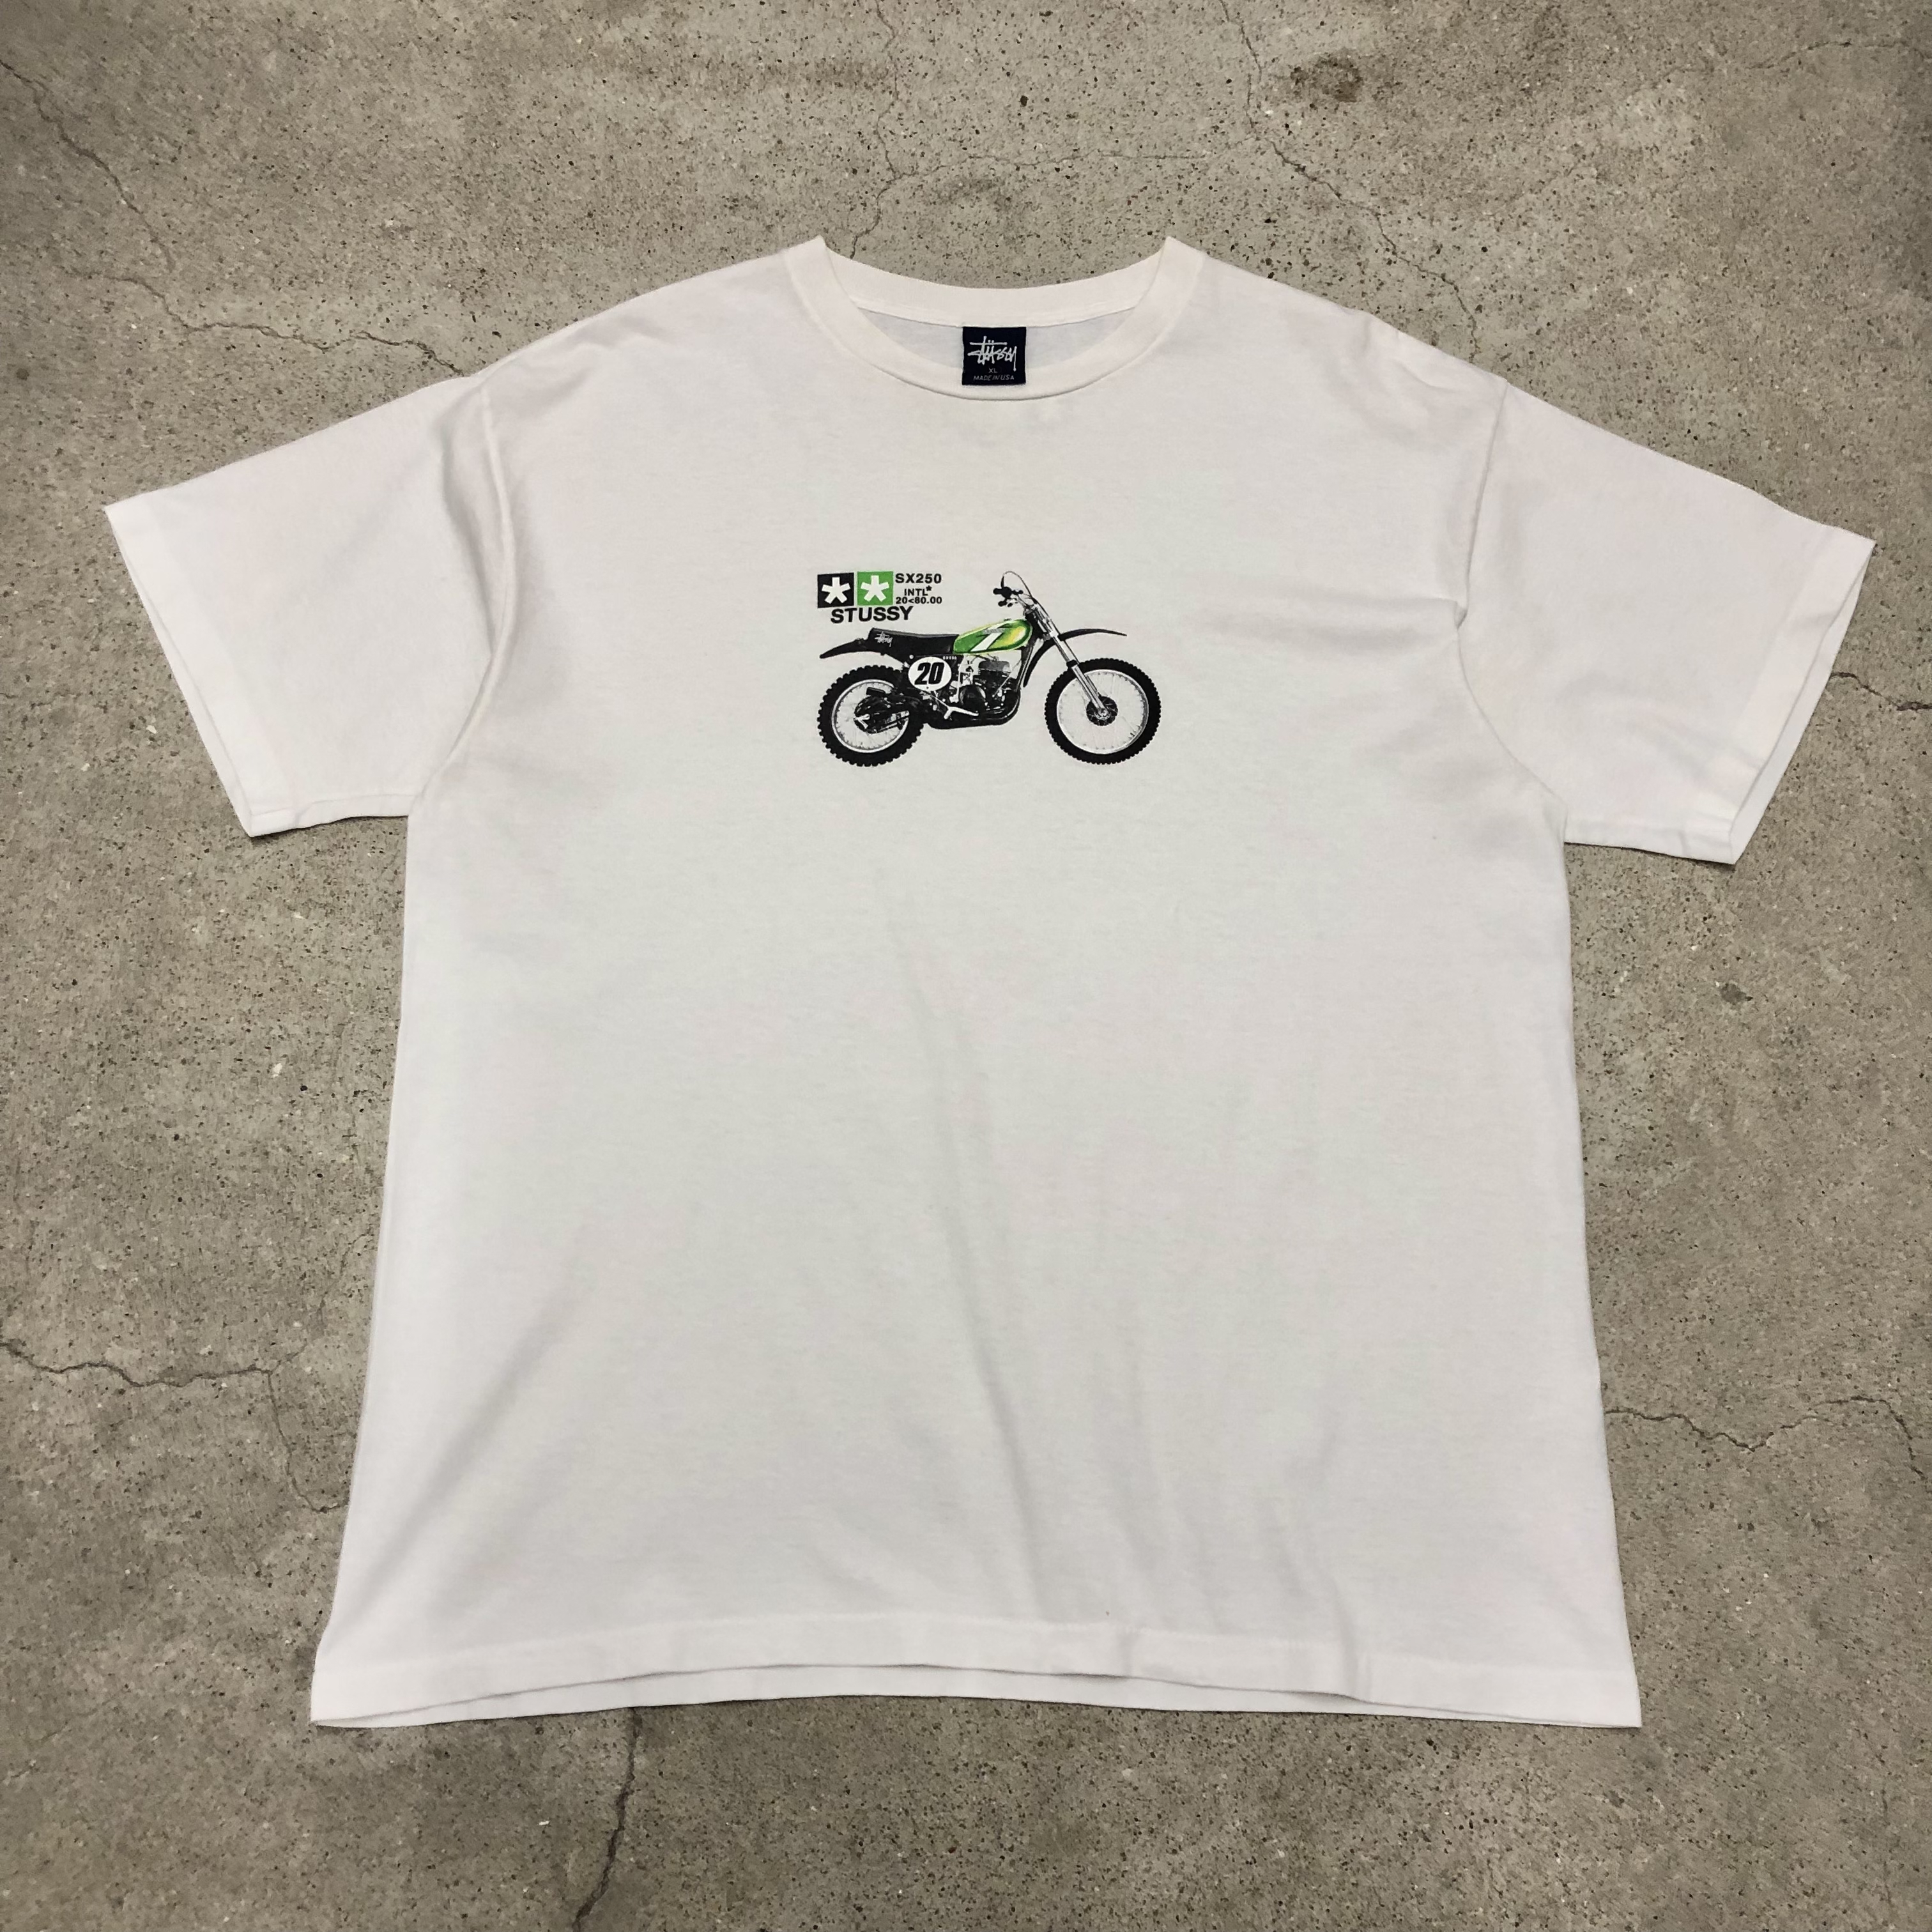 90s OLD STUSSY/SX250 print Tee/USA製/紺タグ/XL/バイクプリント/T 